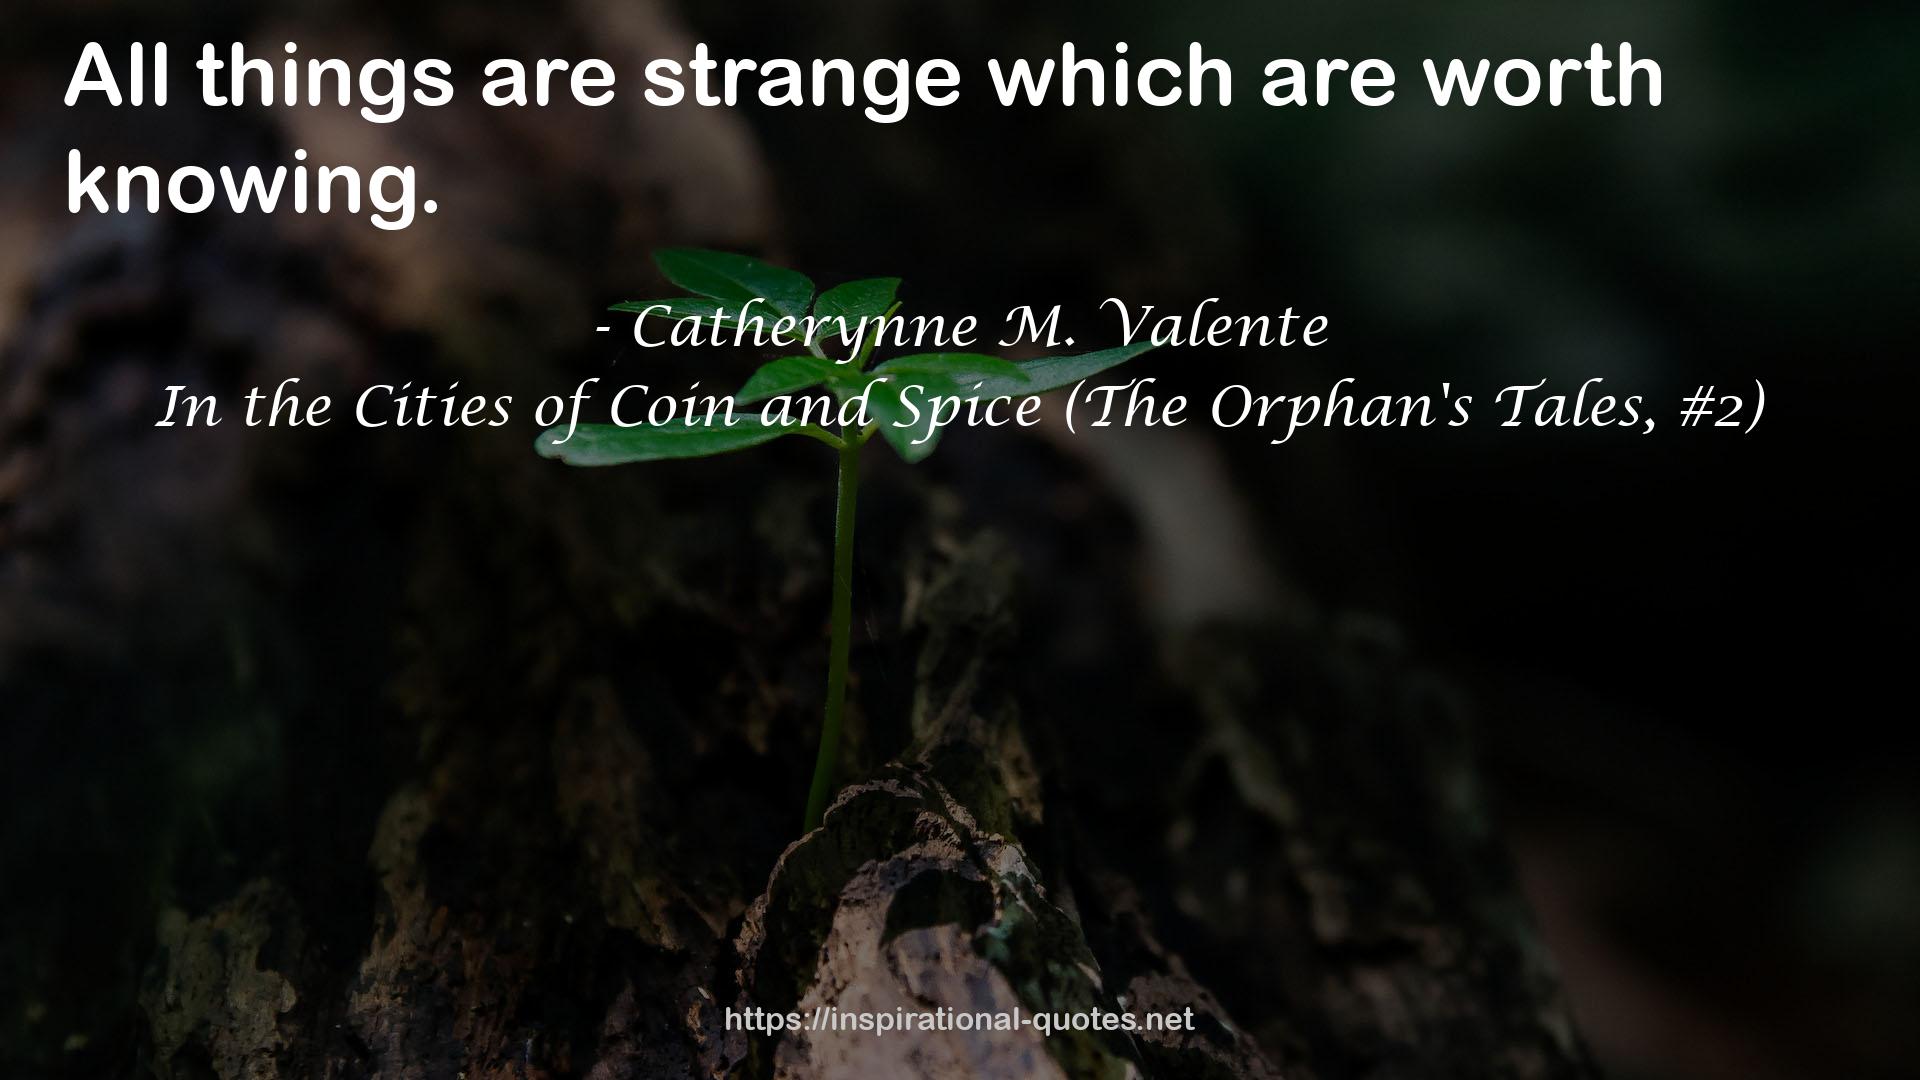 In the Cities of Coin and Spice (The Orphan's Tales, #2) QUOTES